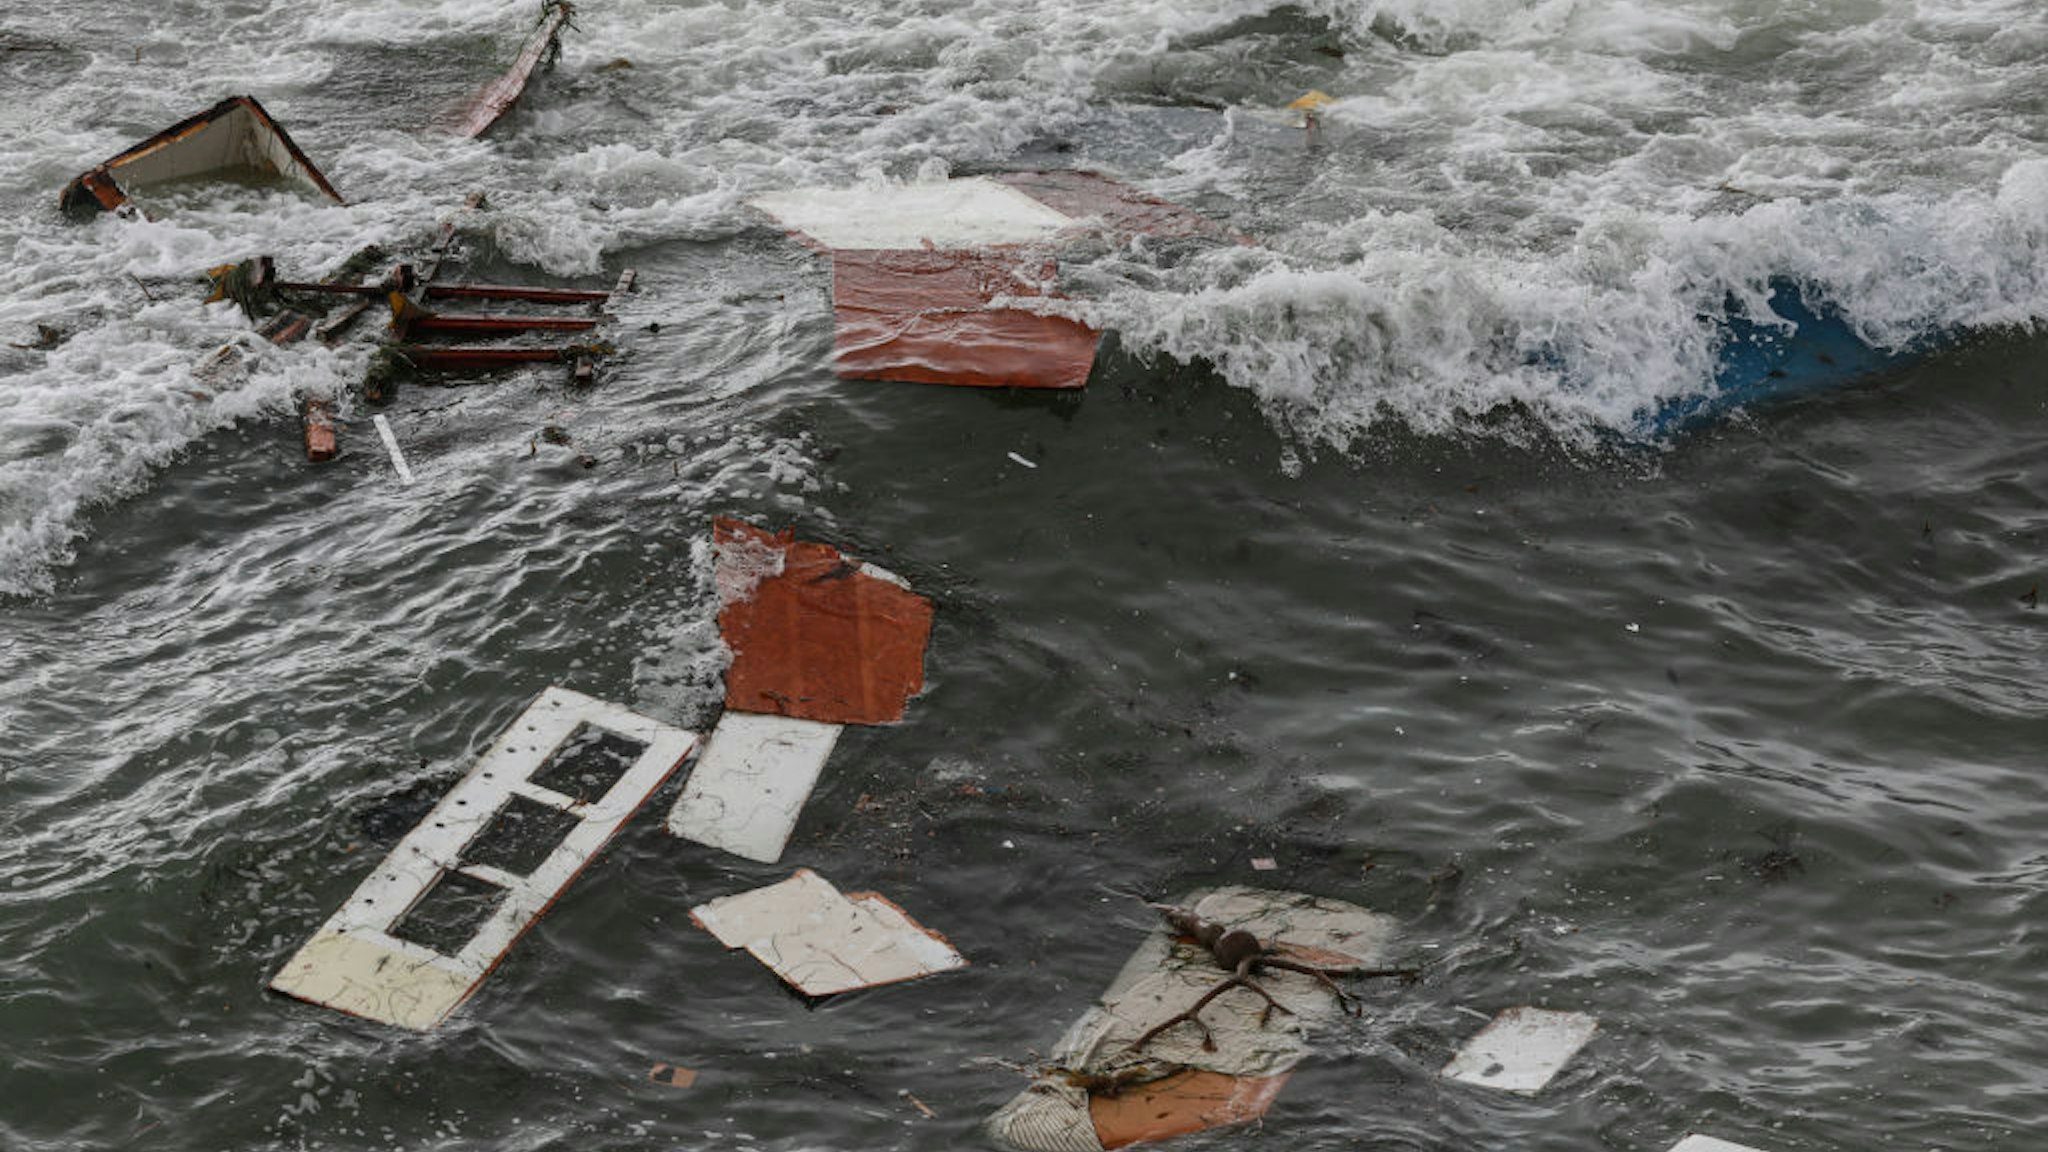 SAN DIEGO, CA - MAY 02: Debris is littered along the shoreline off Cabrillo Monument on May 2, 2021 in San Diego, California. Two people died and Twenty were rescued after a vessel overturned on Sunday afternoon off Point Loma area of San Diego Photo by Sandy Huffaker / Getty Images / Stringer via Getty Images